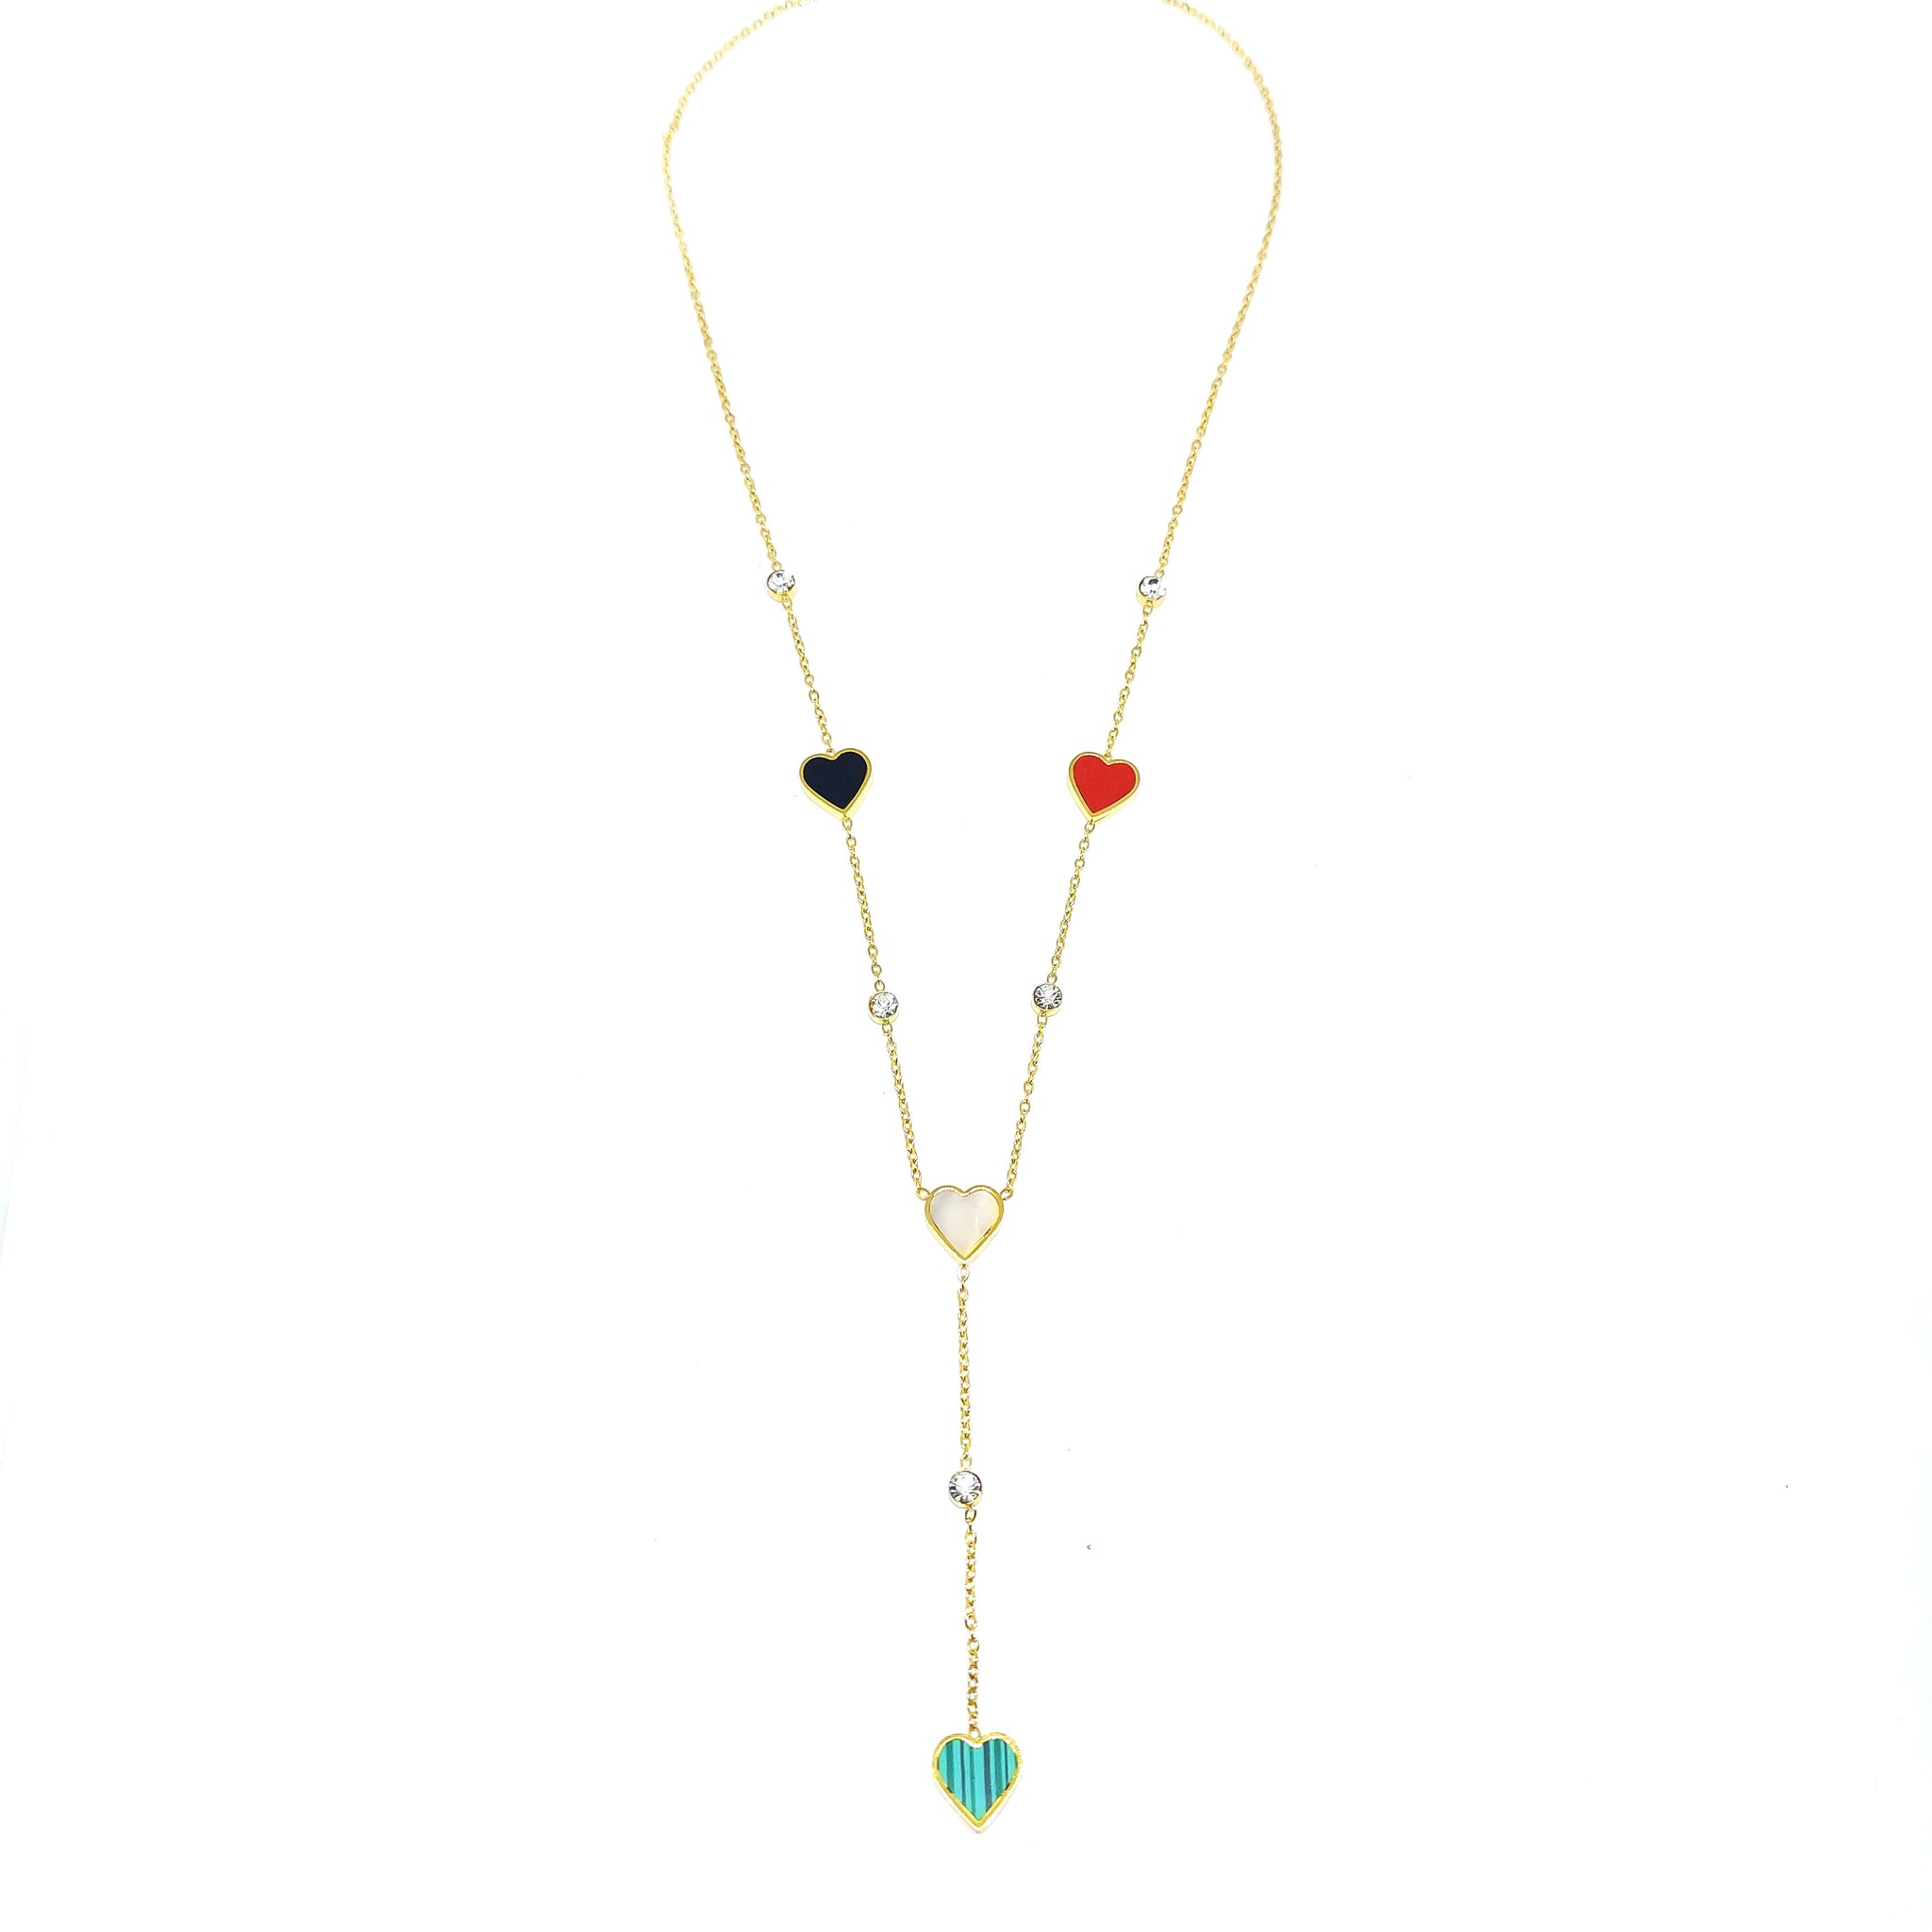 ESN 7833: All IPG Multi-Color Heart & Cz Double Necklace